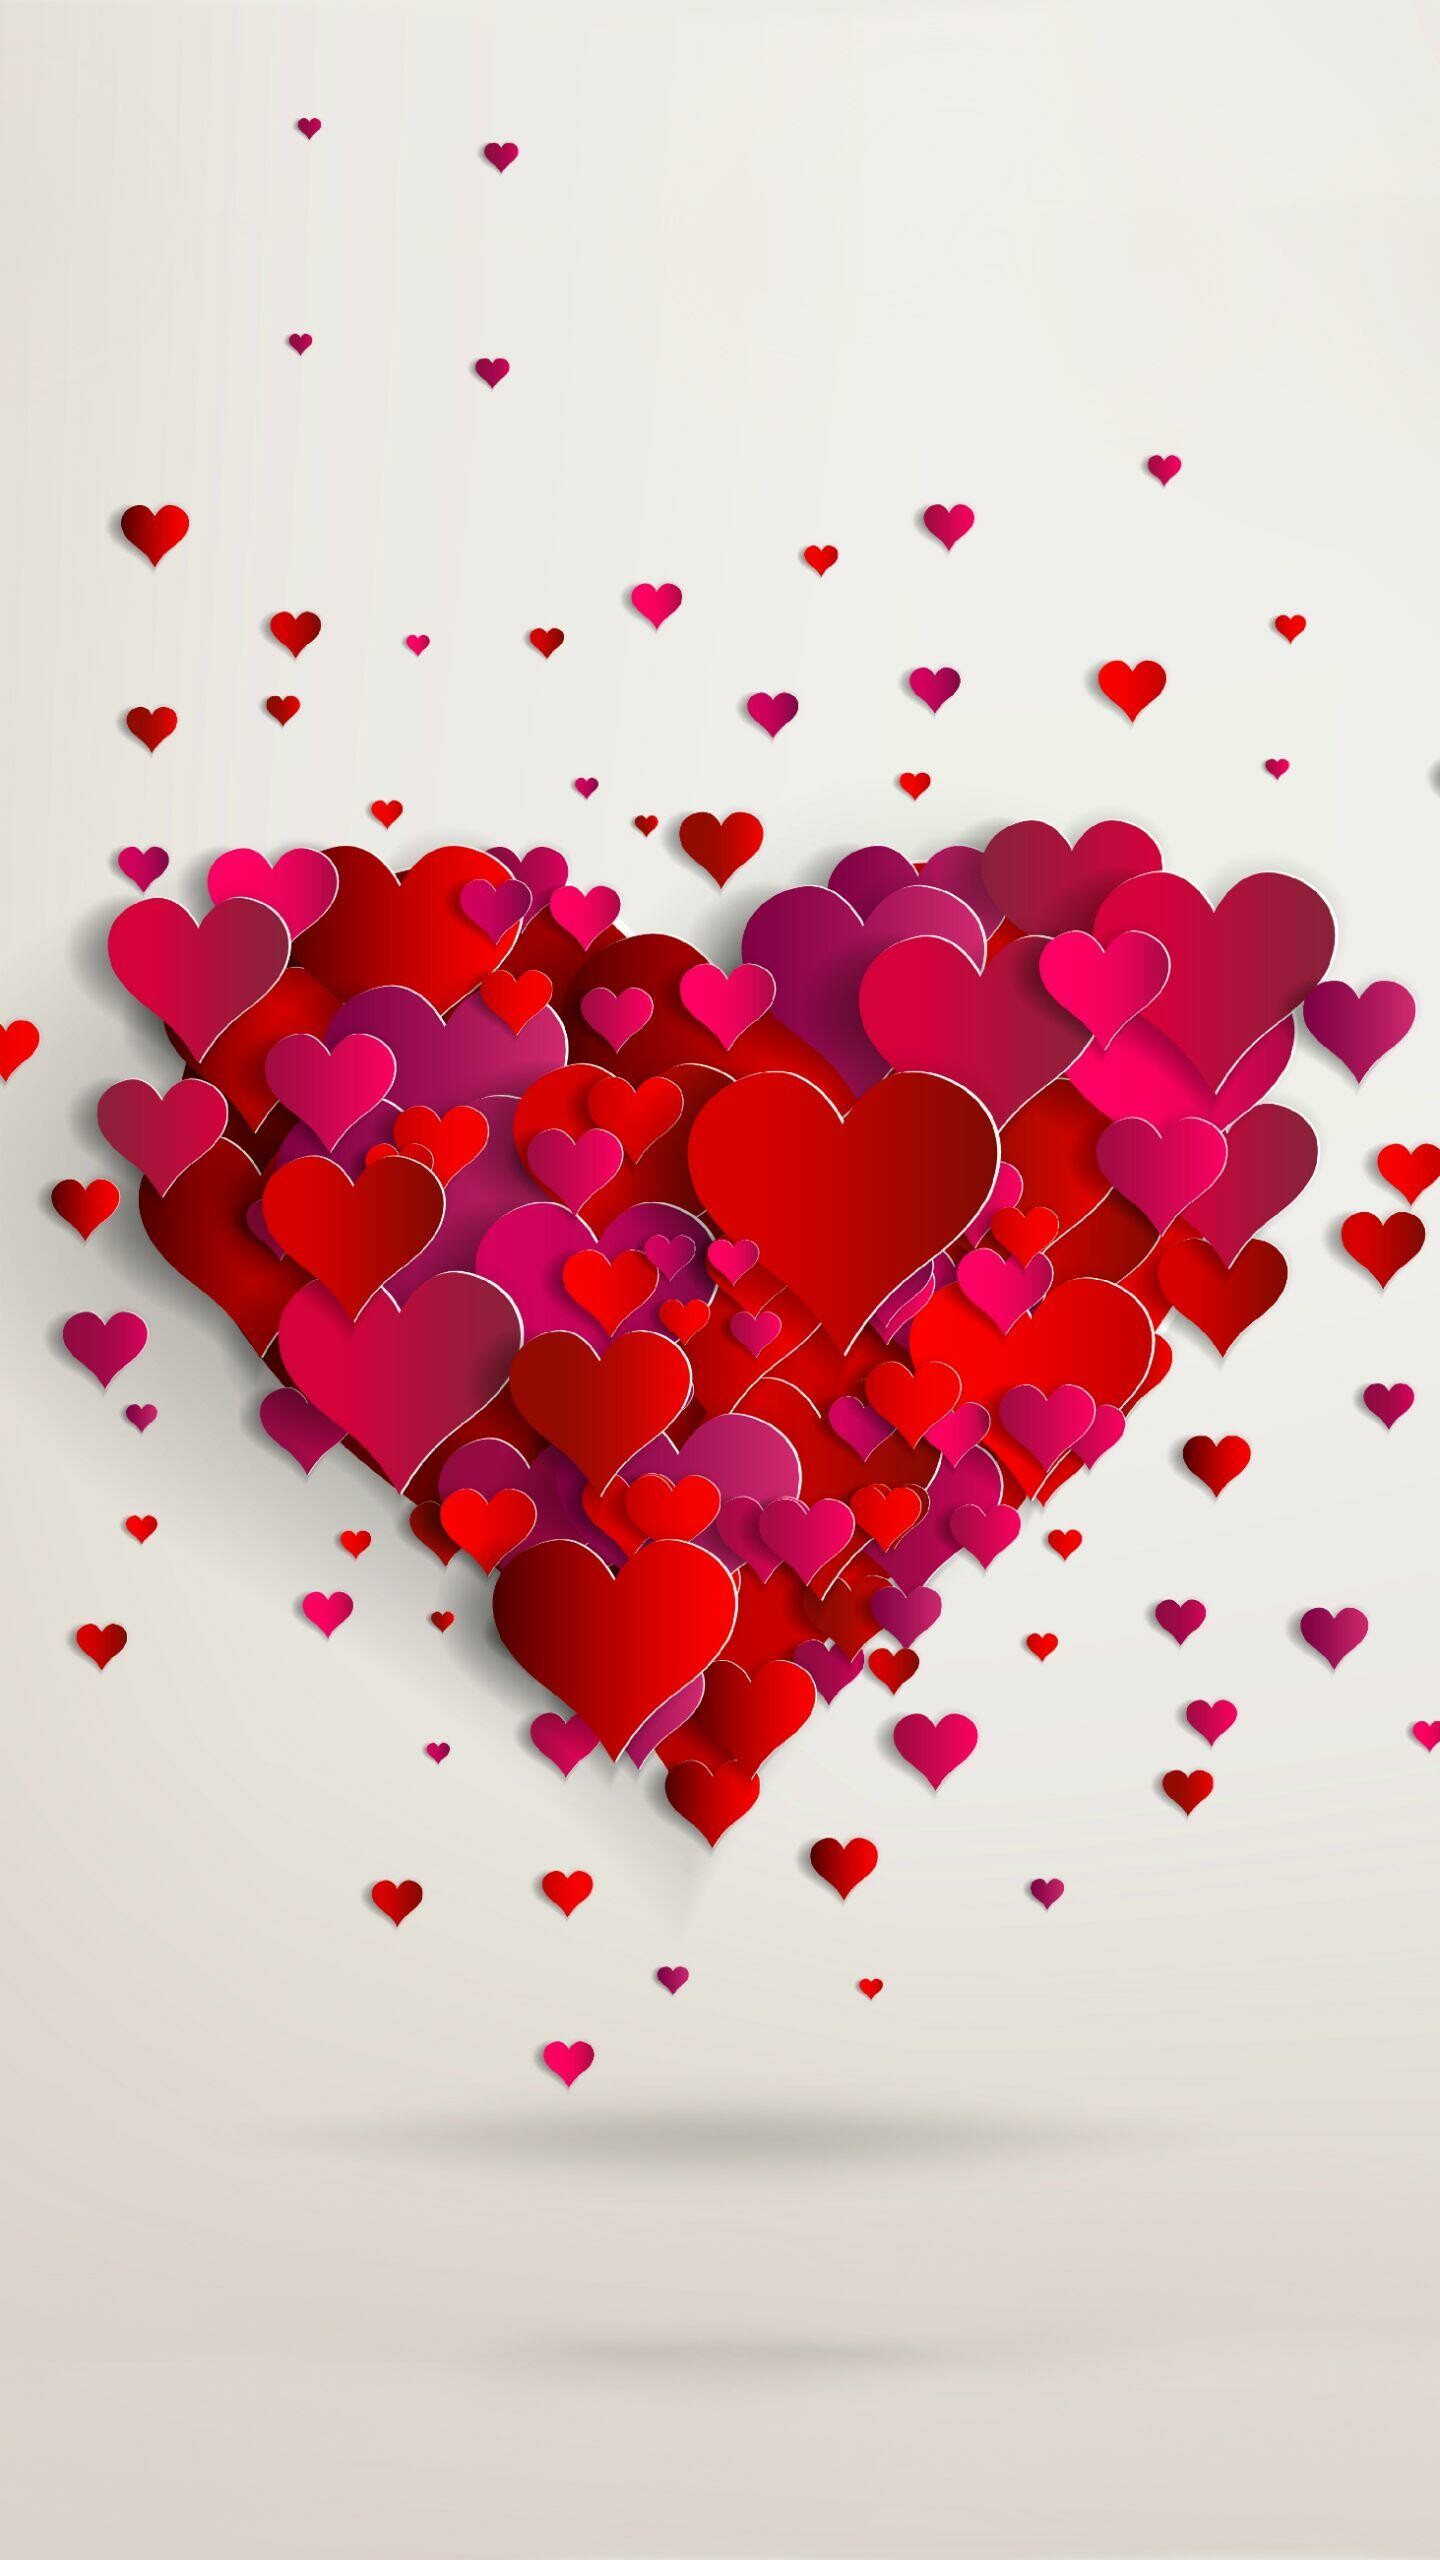 Heart: Symbolizes the core of romantic love, affectionate emotion, and caring. 1440x2560 HD Wallpaper.